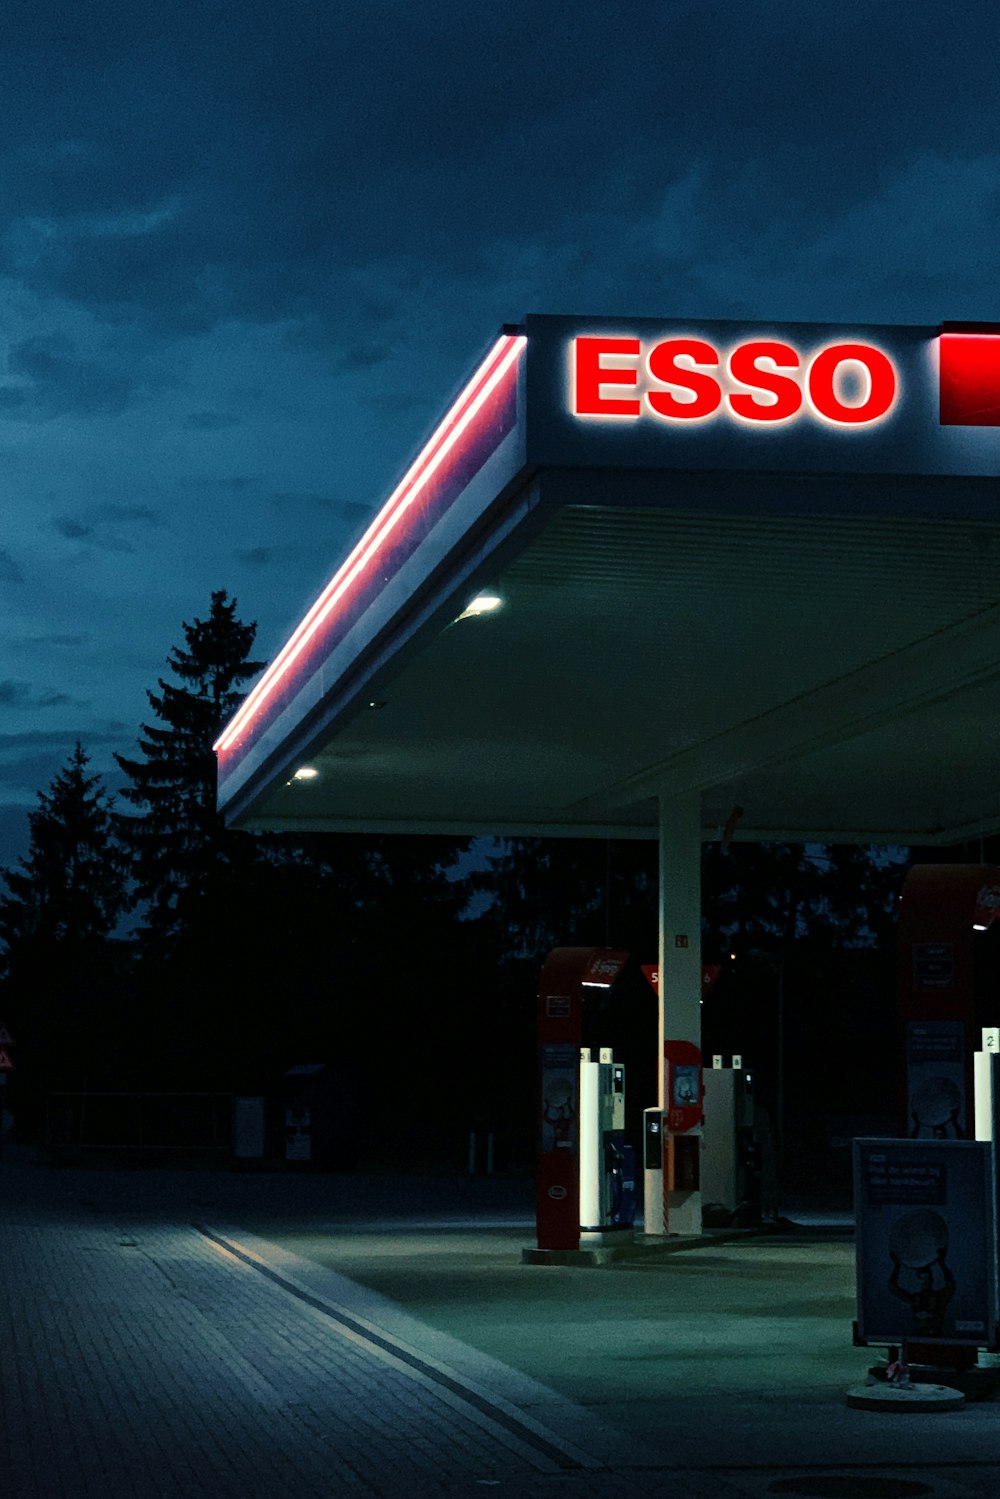 Esso gas station during night